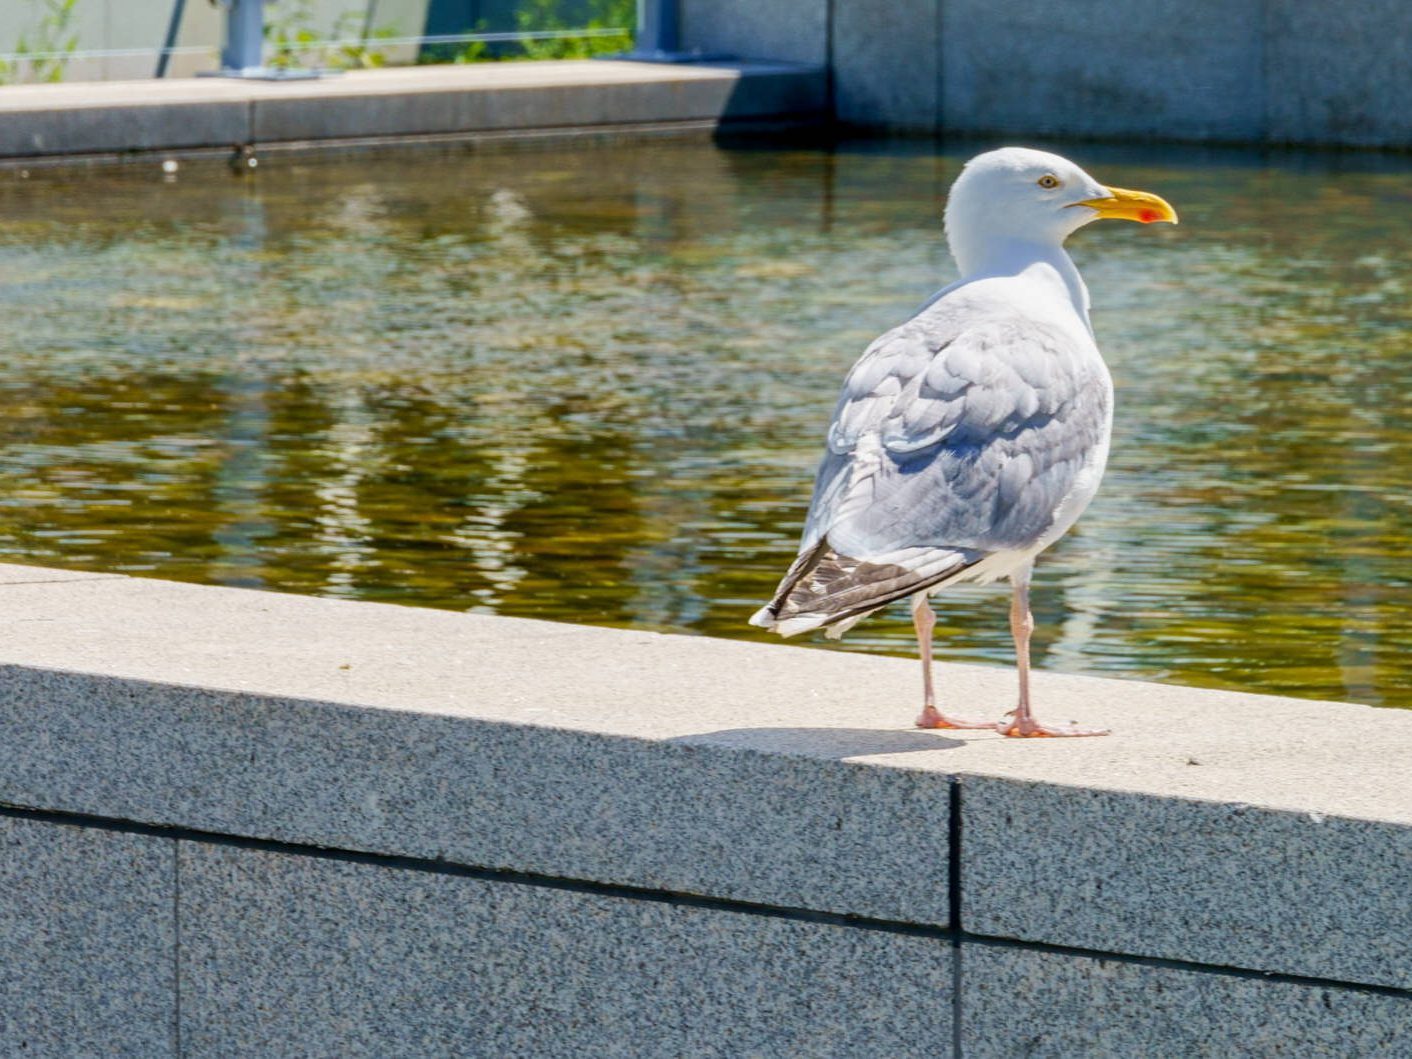 YOUNG SEAGULL WAS UPSET BECAUSE ADULT WOULD NOT FEED IT 005